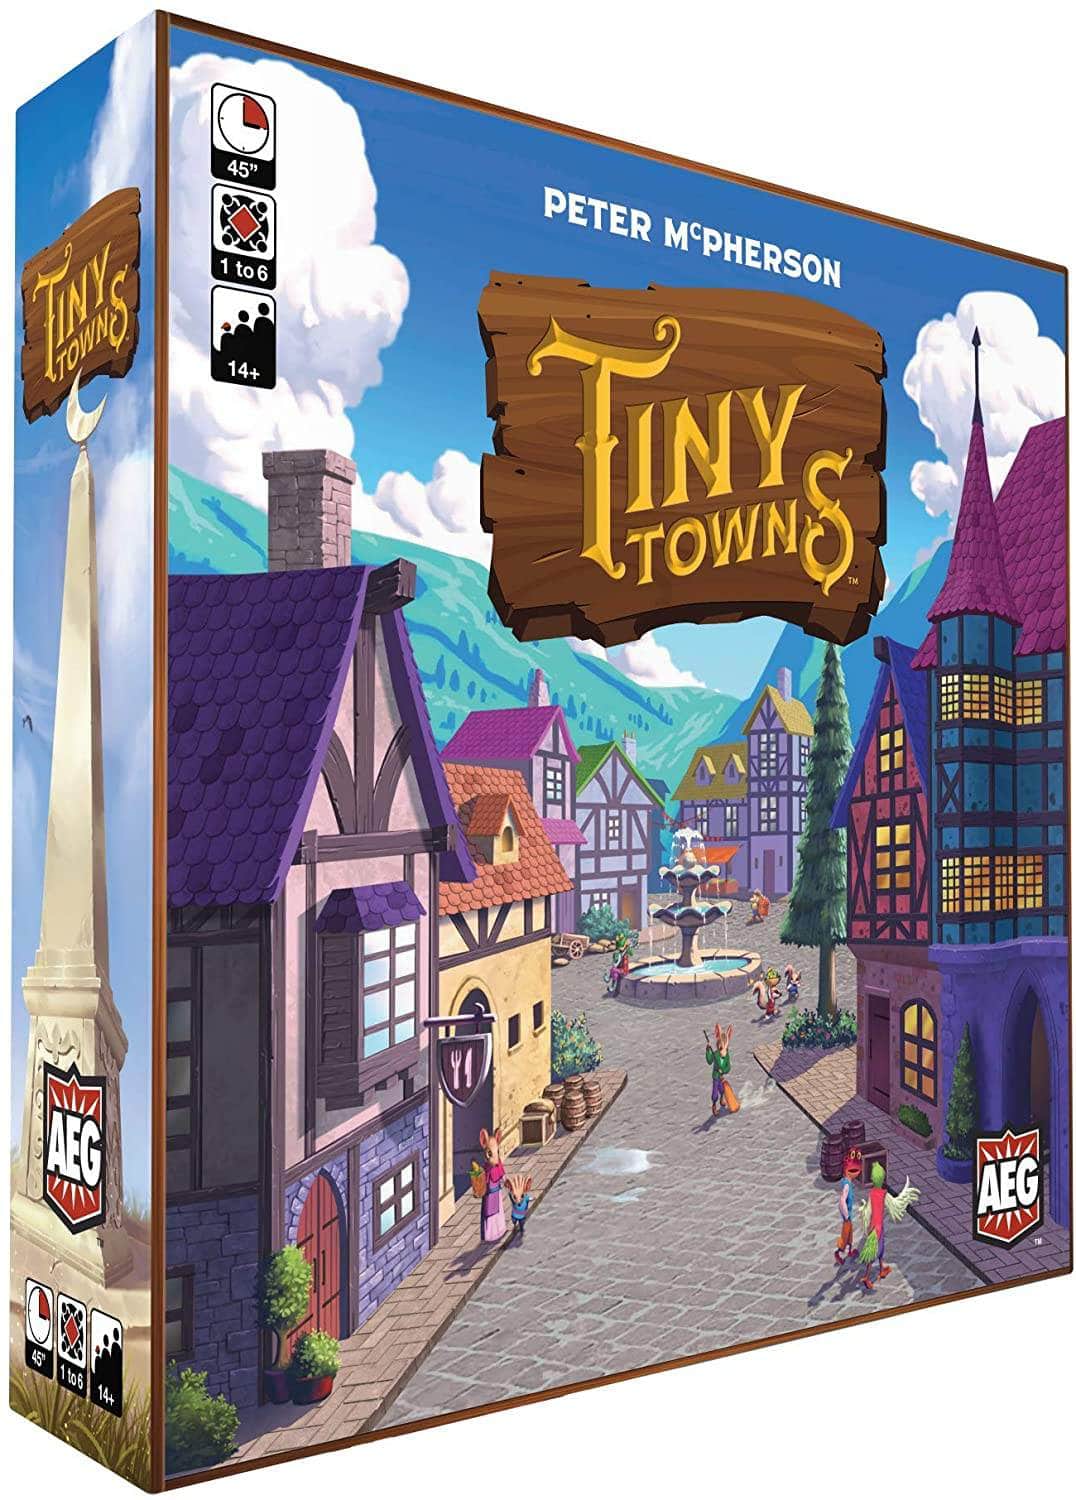 Tiny Towns (Retail Edition) Retail Board Game Alderac Entertainment Group KS800585A